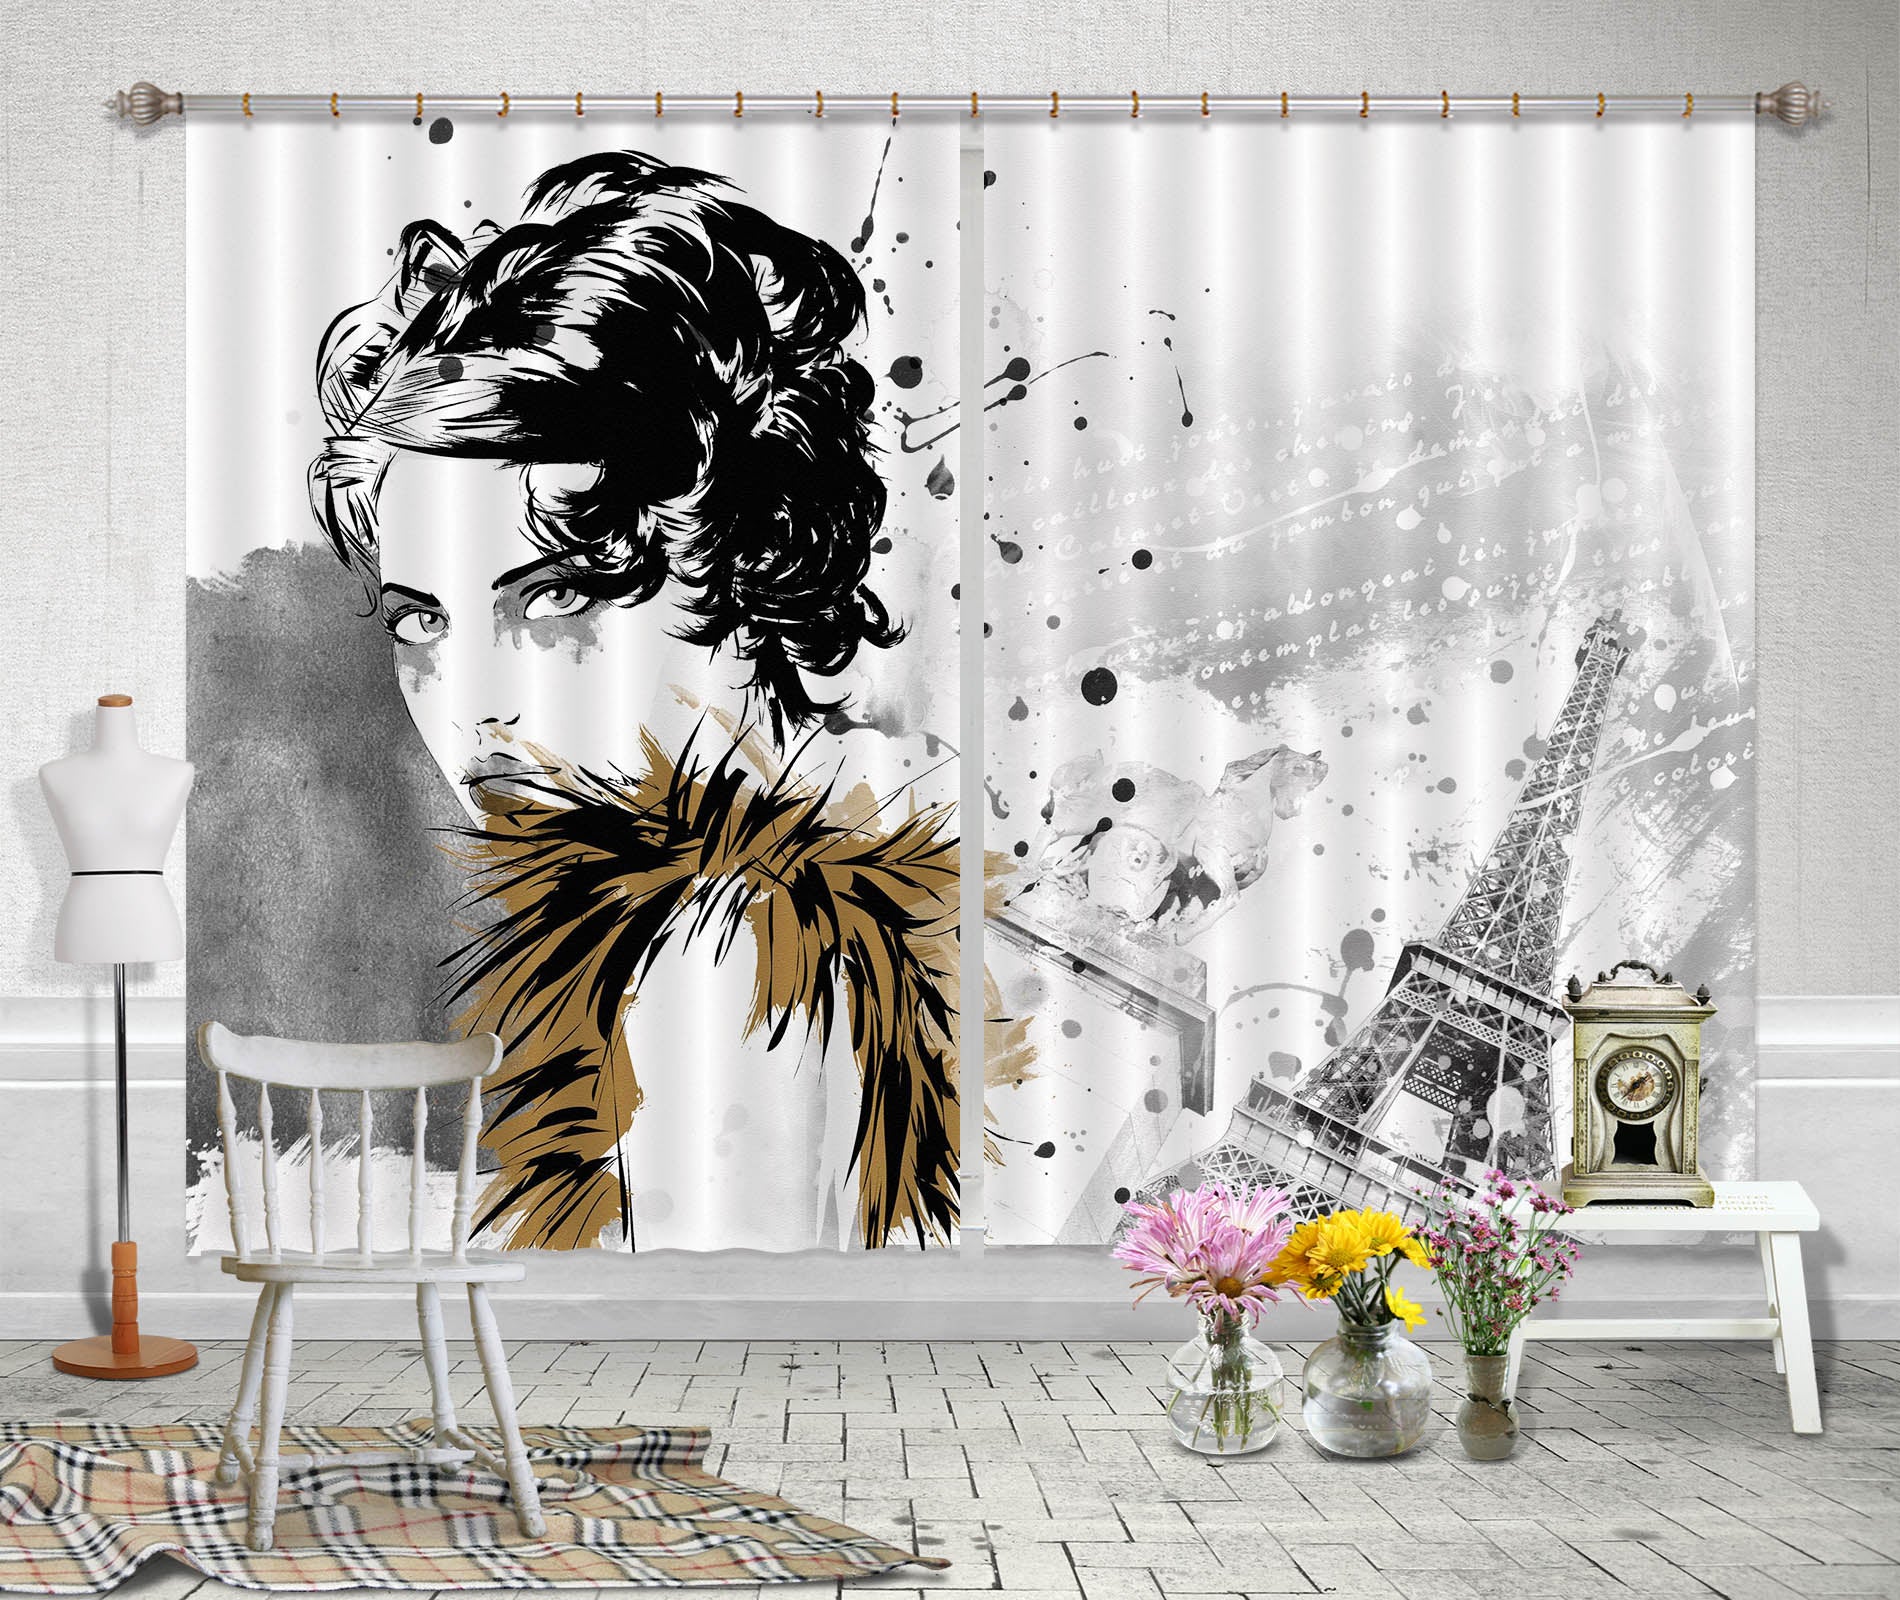 3D Sketch Girl 765 Curtains Drapes